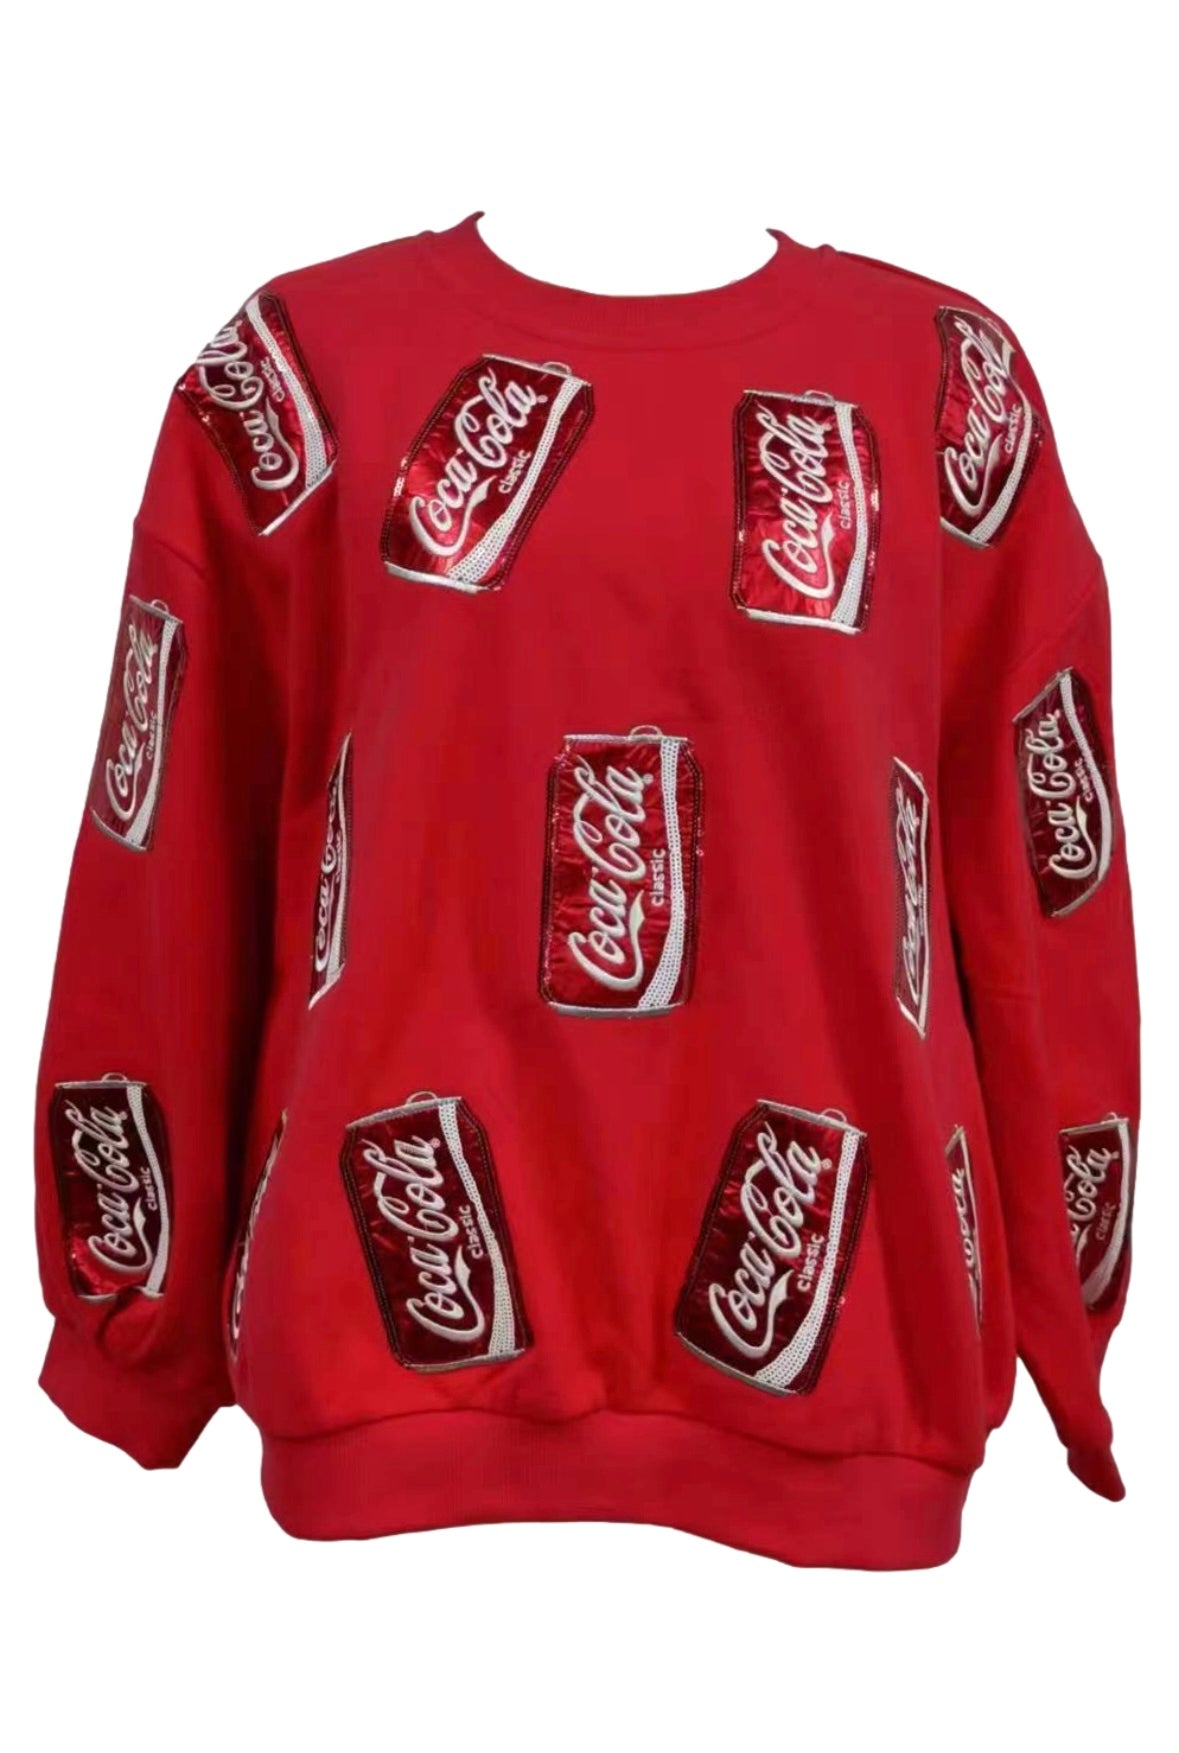 Queen of Sparkles Red Scattered Coke Can Short Set